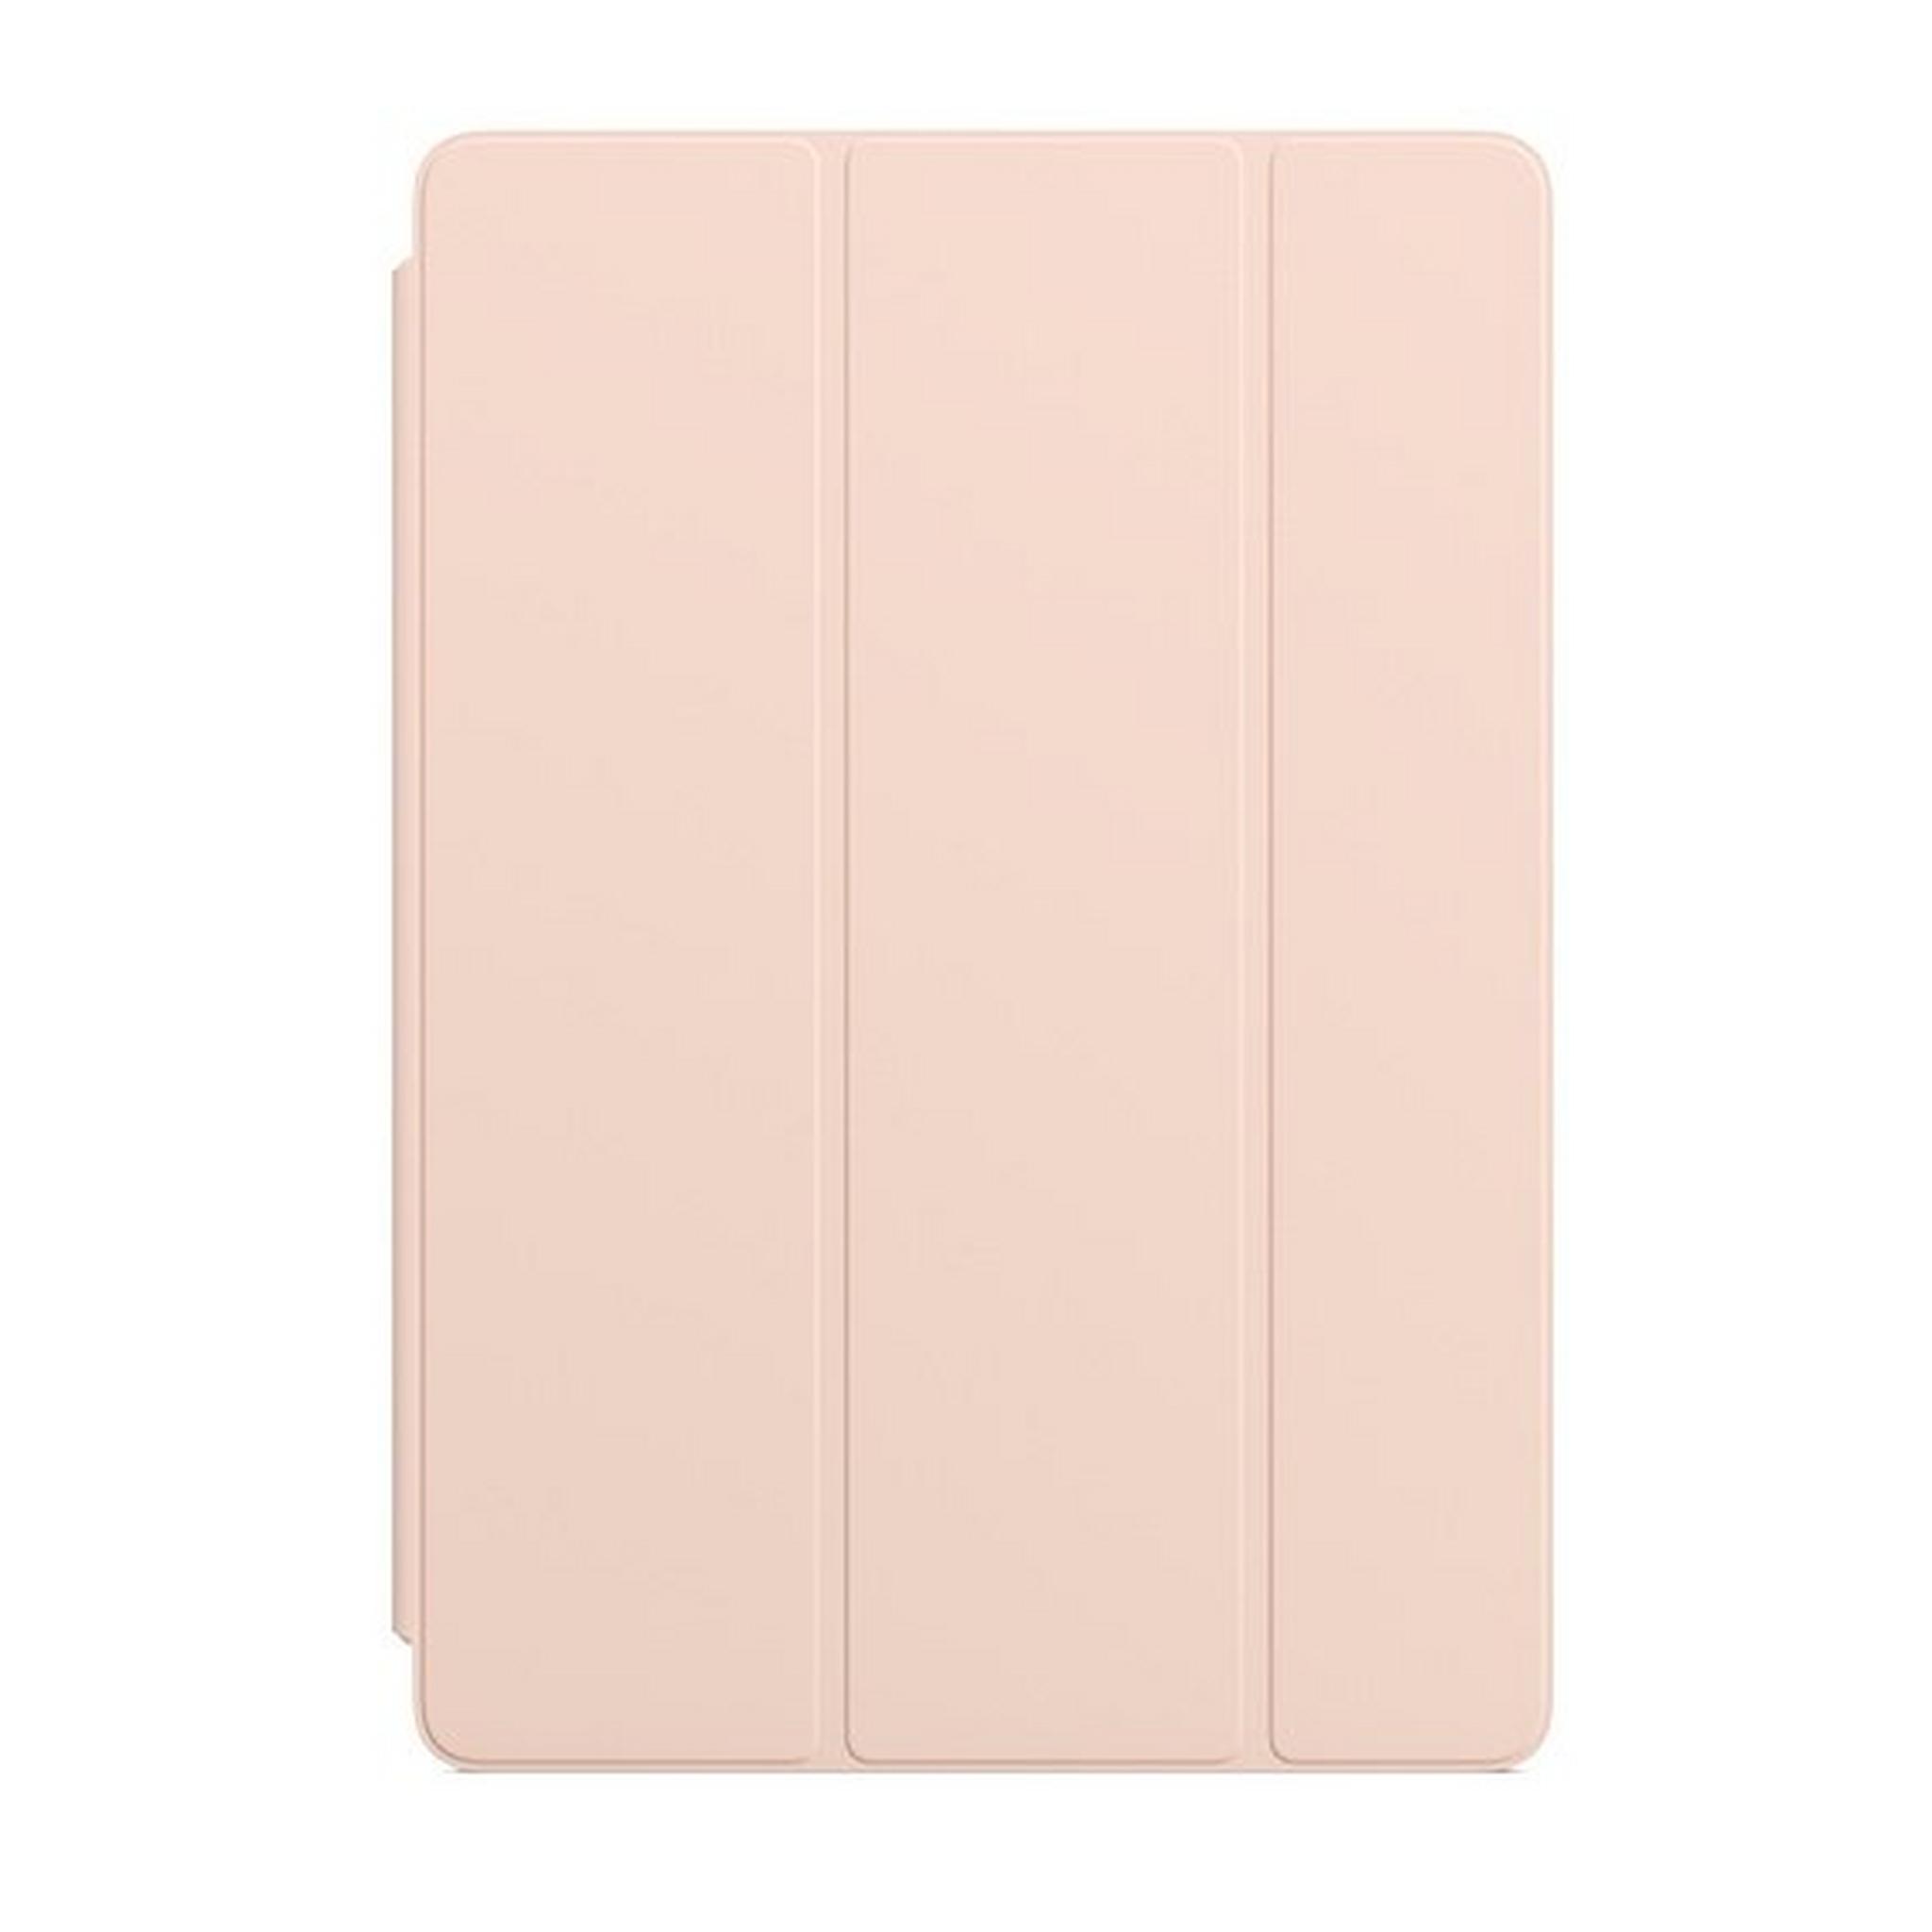 Apple Smart Cover for iPad - 8th Generation - Pink